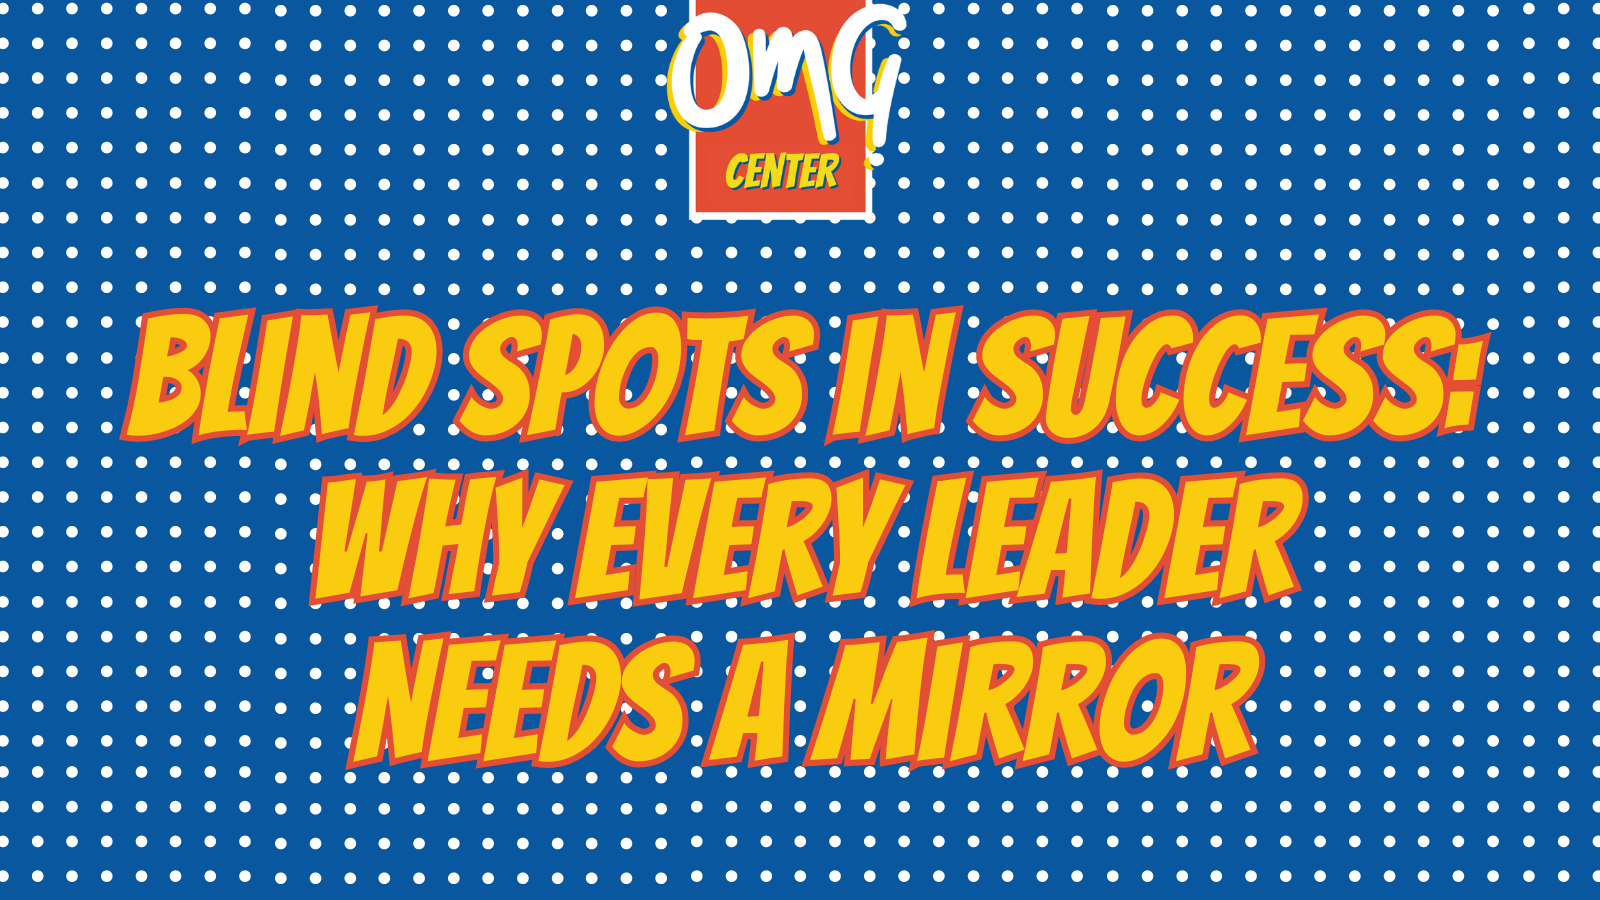 Blind Spots in Success Why Every Leader Needs a Mirror